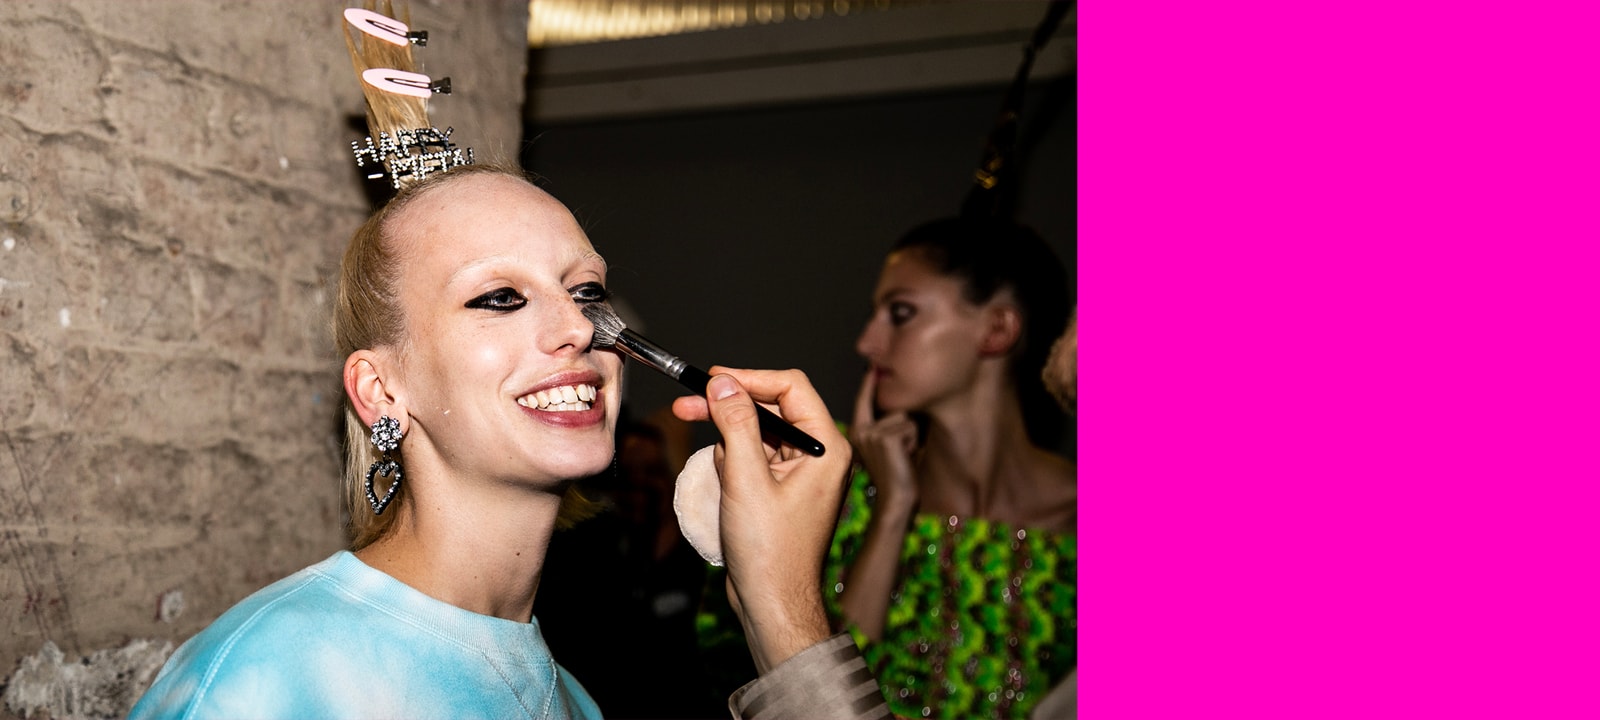 London Fashion Week SS19 Spring Summer 2019 LFW Hair Makeup Trends Beauty Ashely Williams Backstage